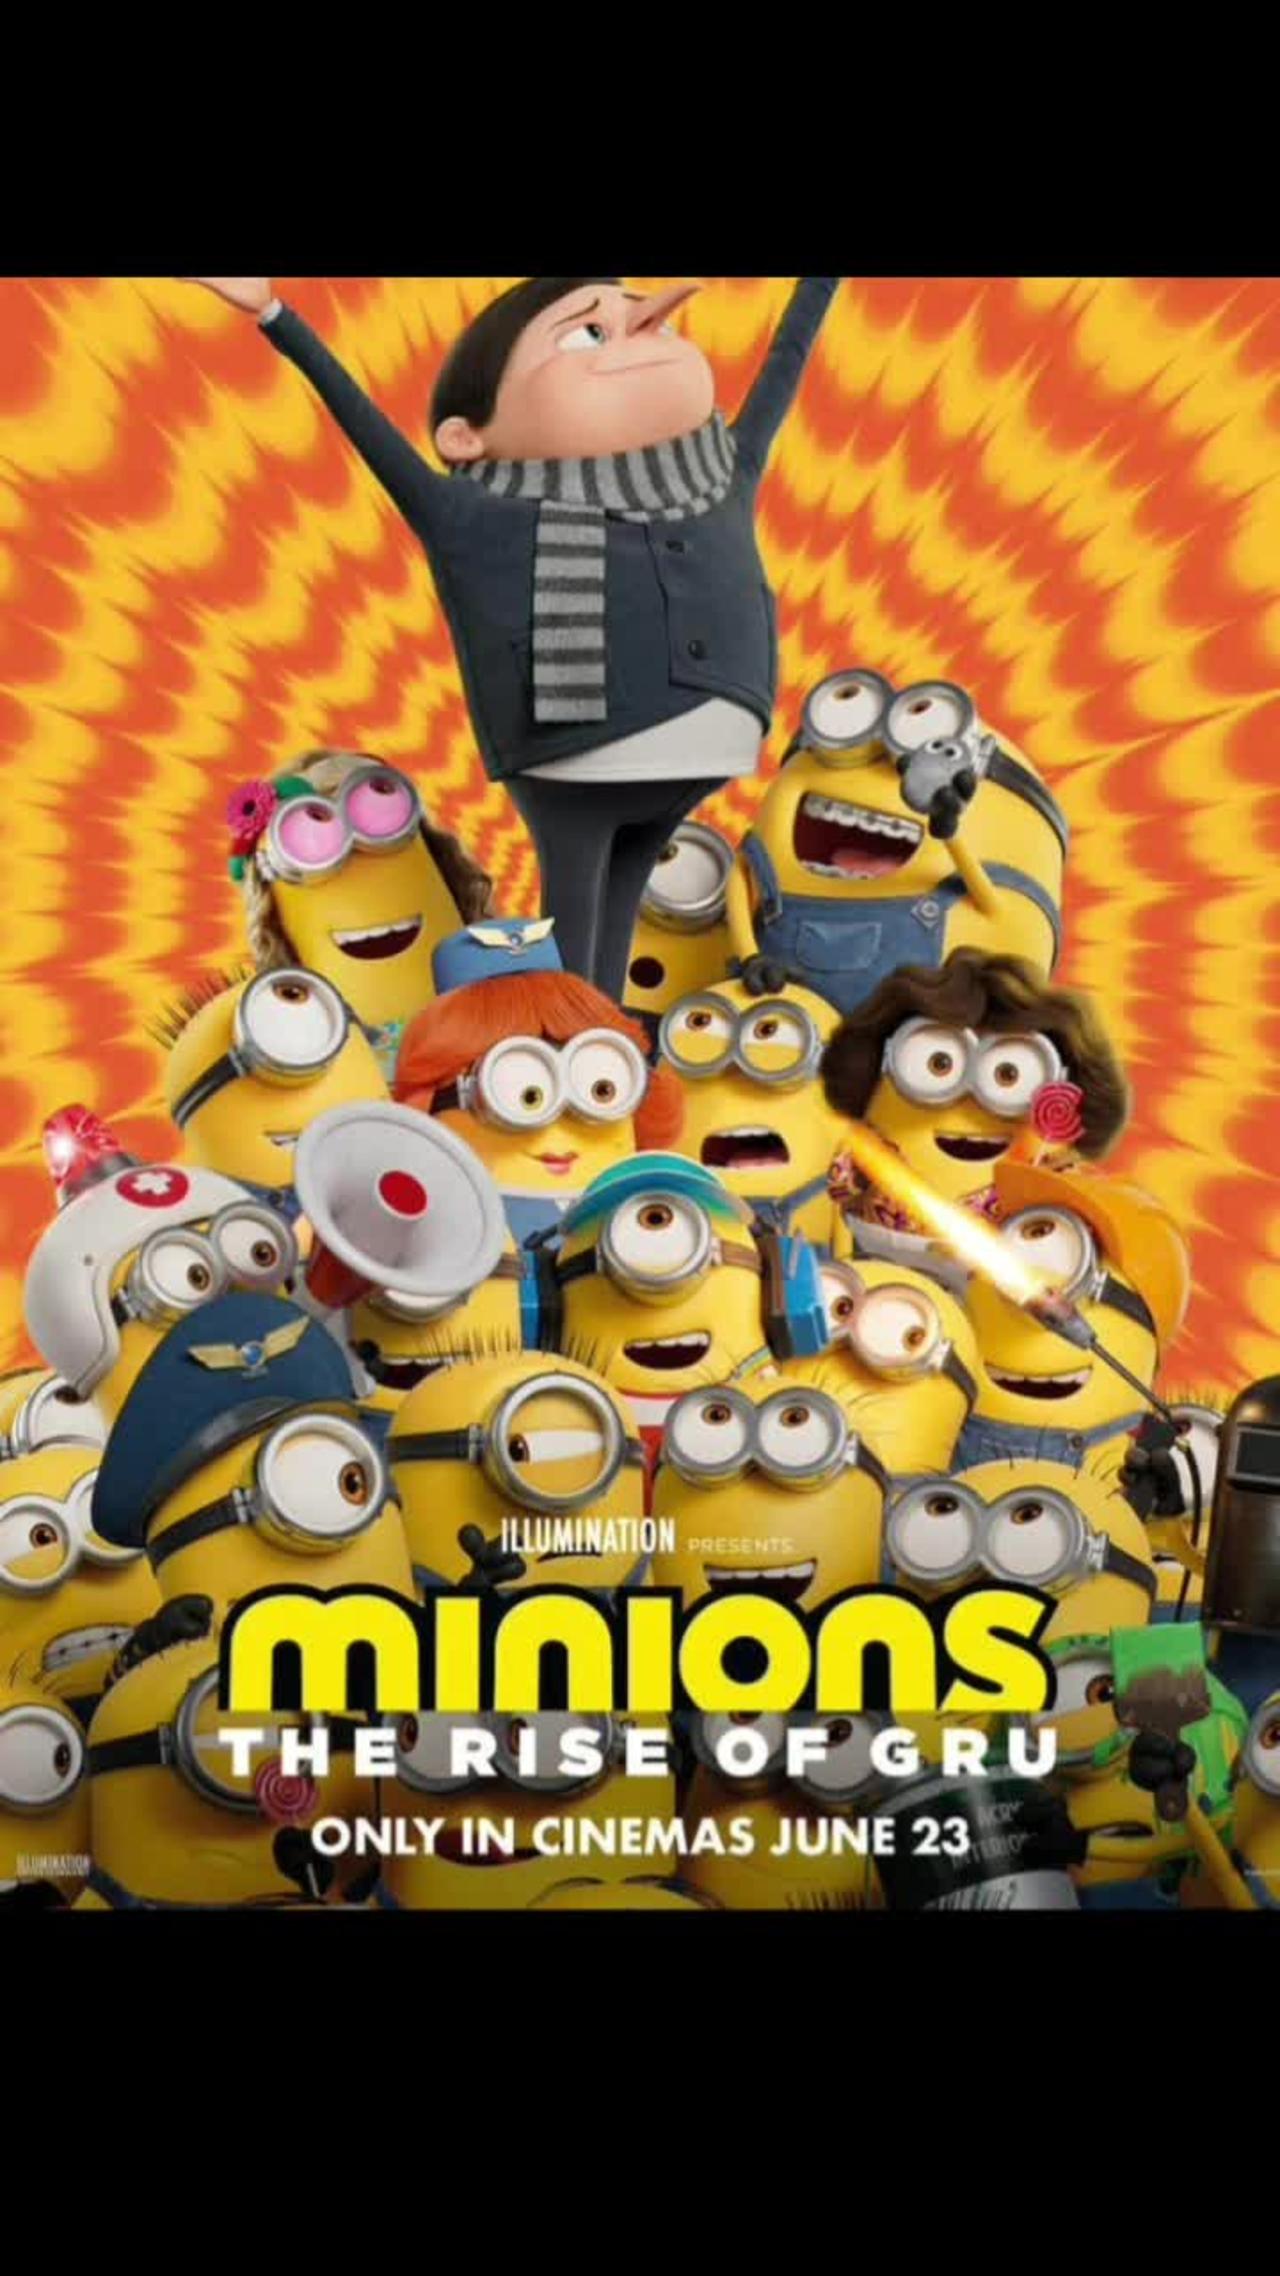 Exposed: The Minions movie called The Rise of Gru a devilish movie for kids, beware!